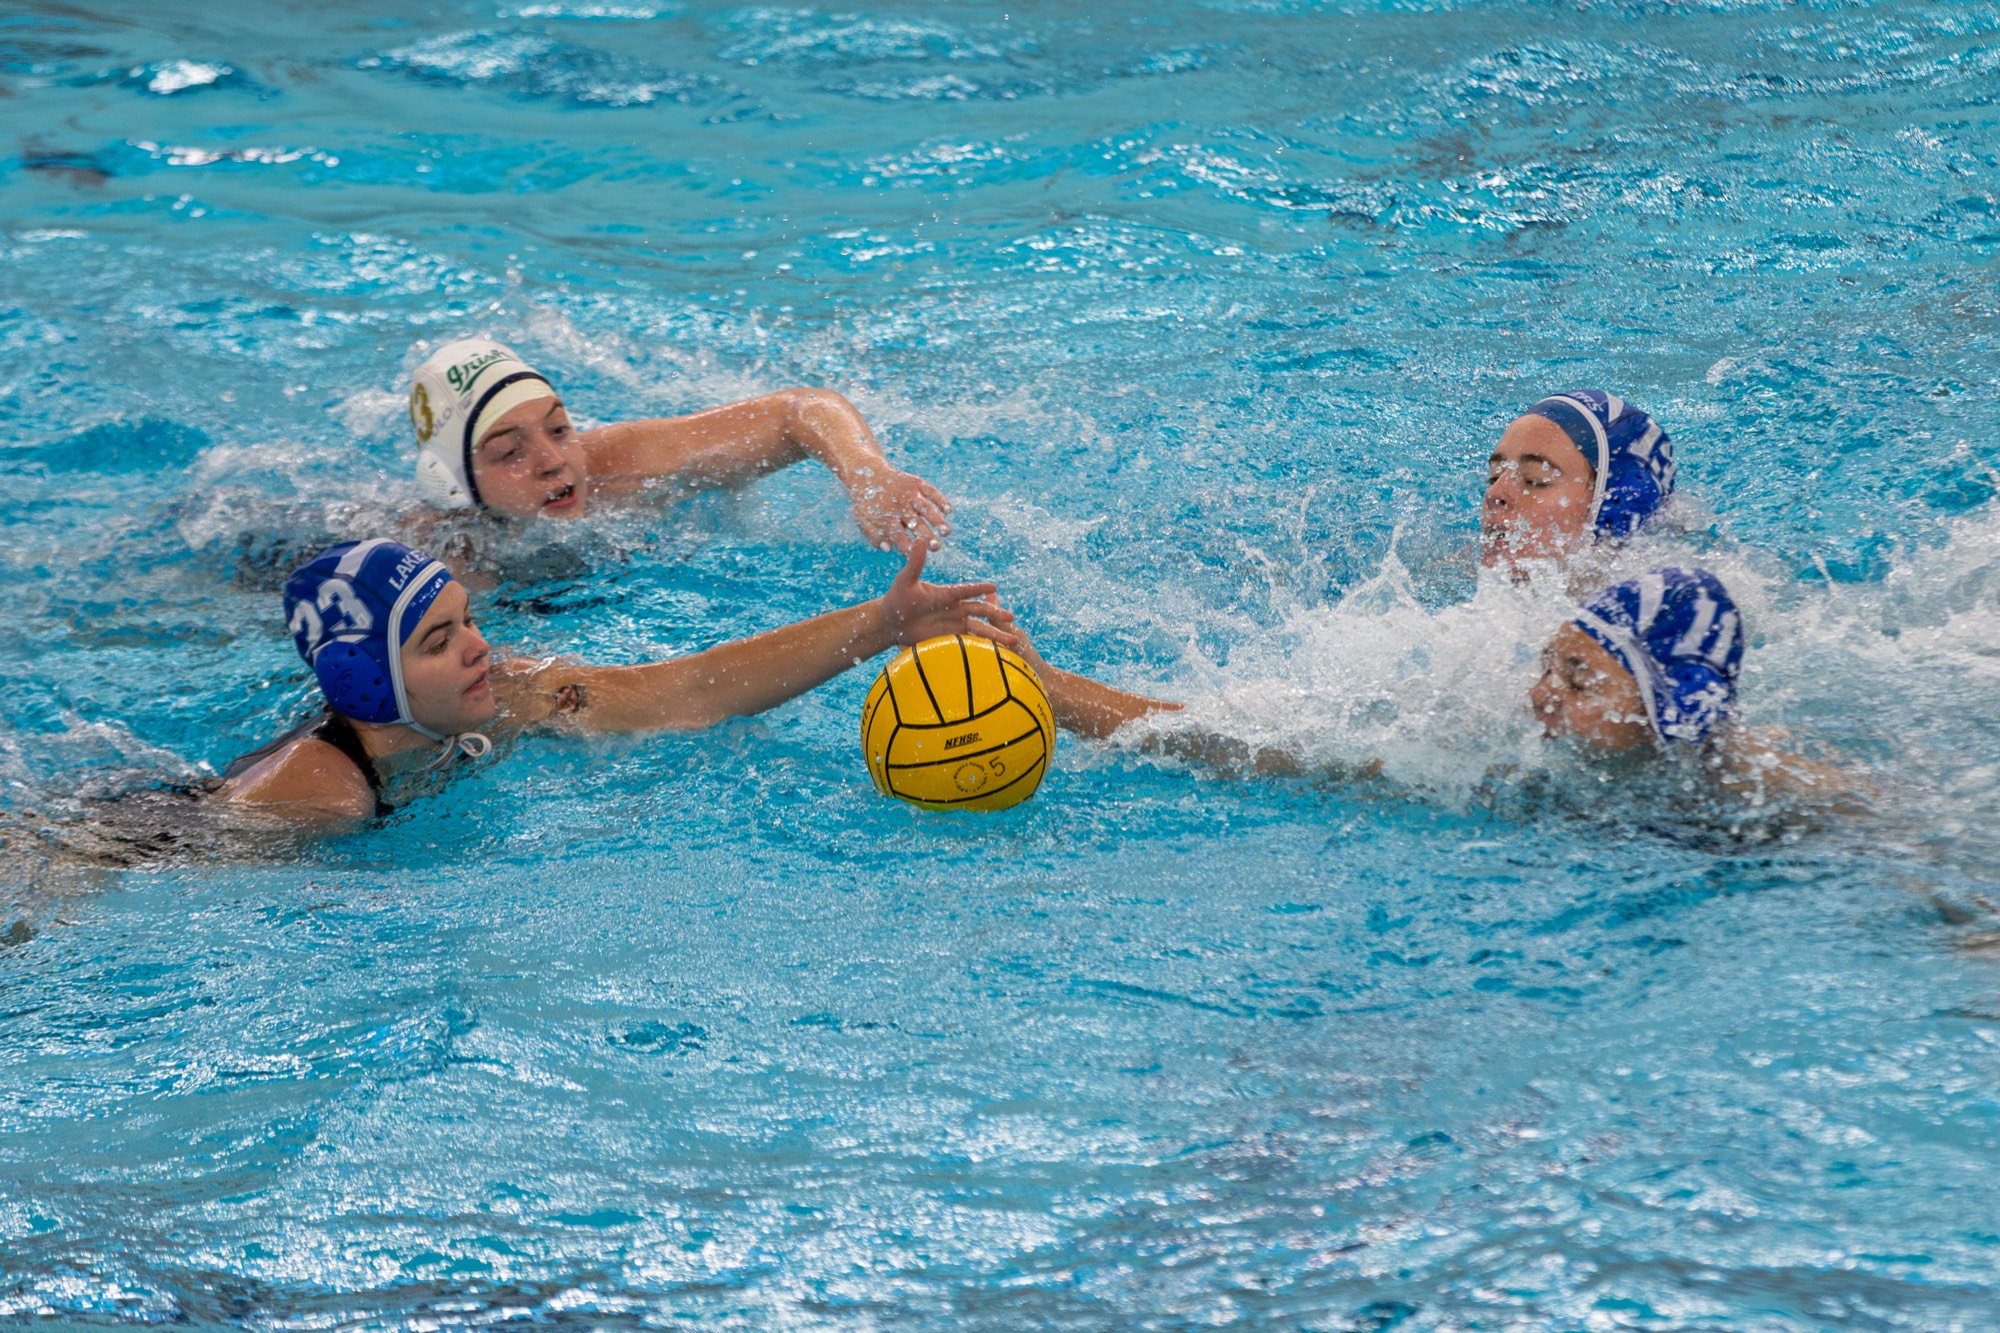 4 players race to the ball in the water